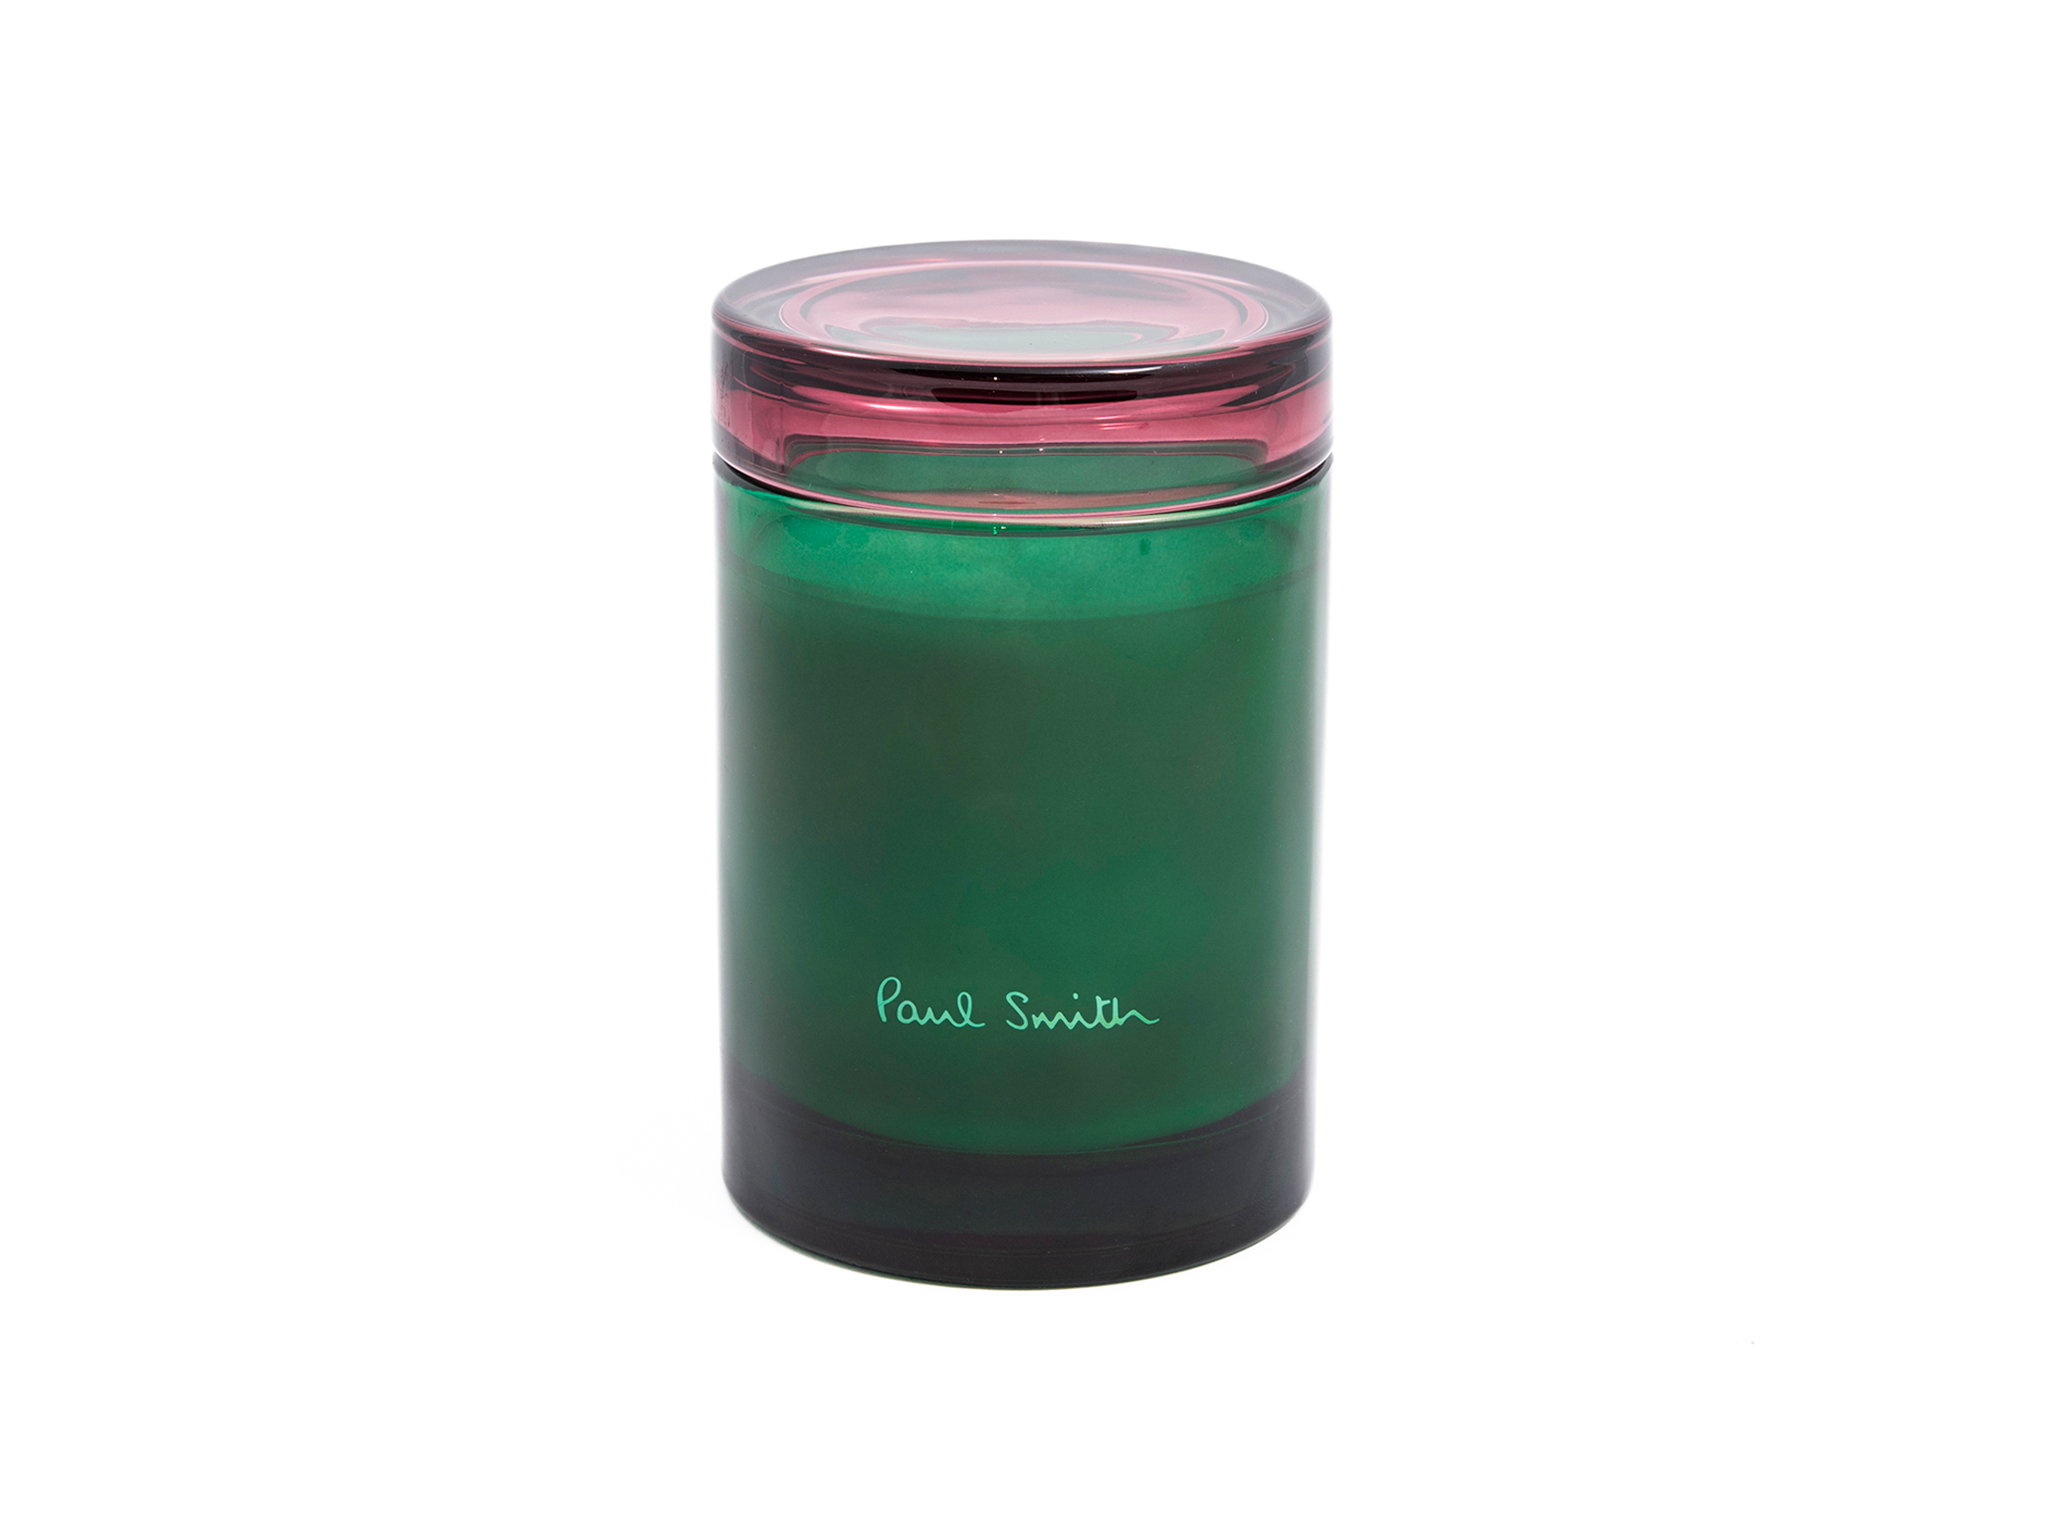 Paul Smith botanist scented candle